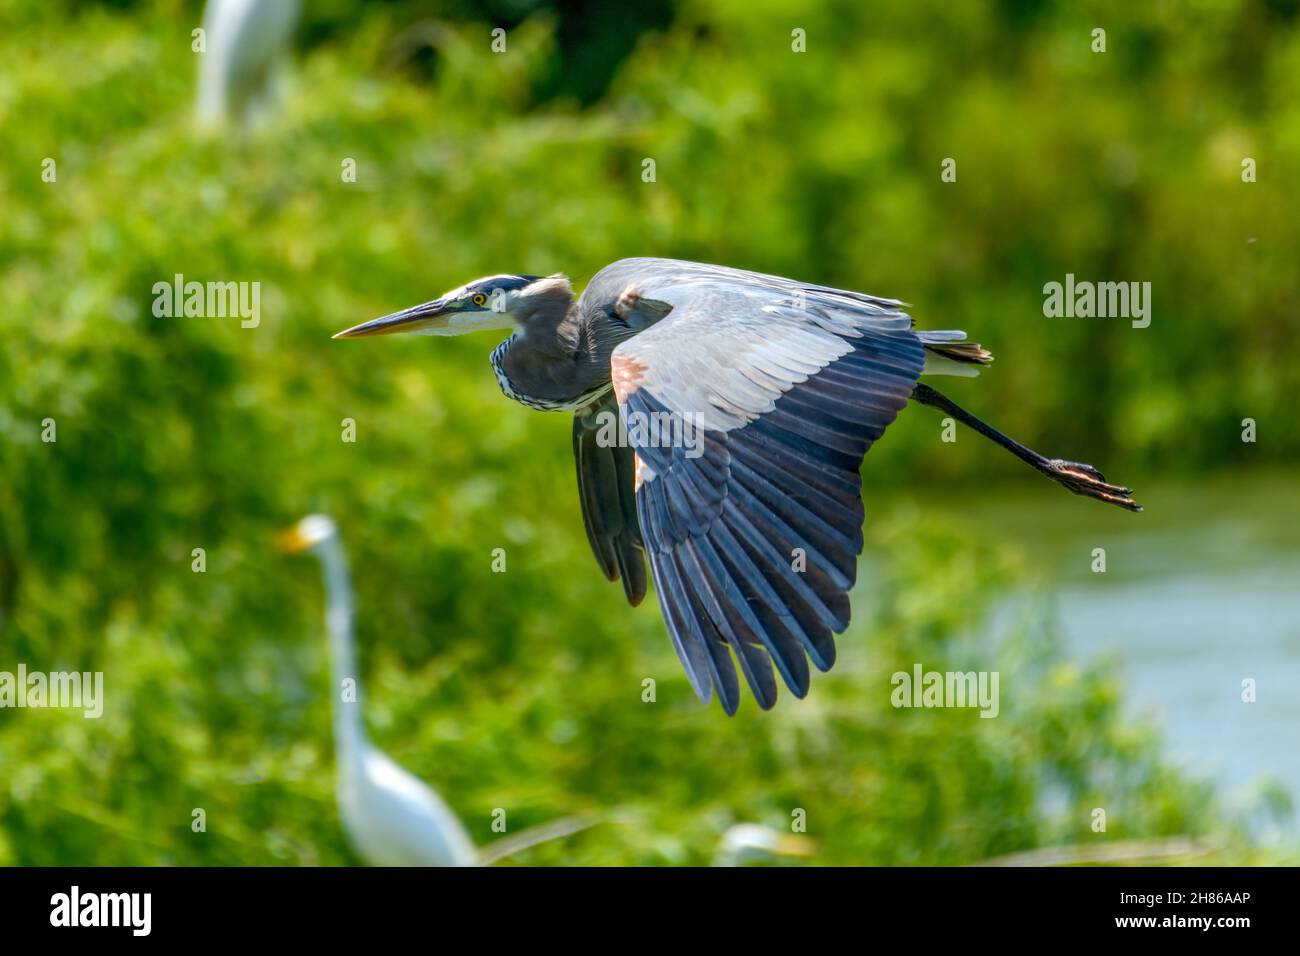 Great Blue Heron (Ardea herodias) flying above green trees with snowy egrets in the background Stock Photo